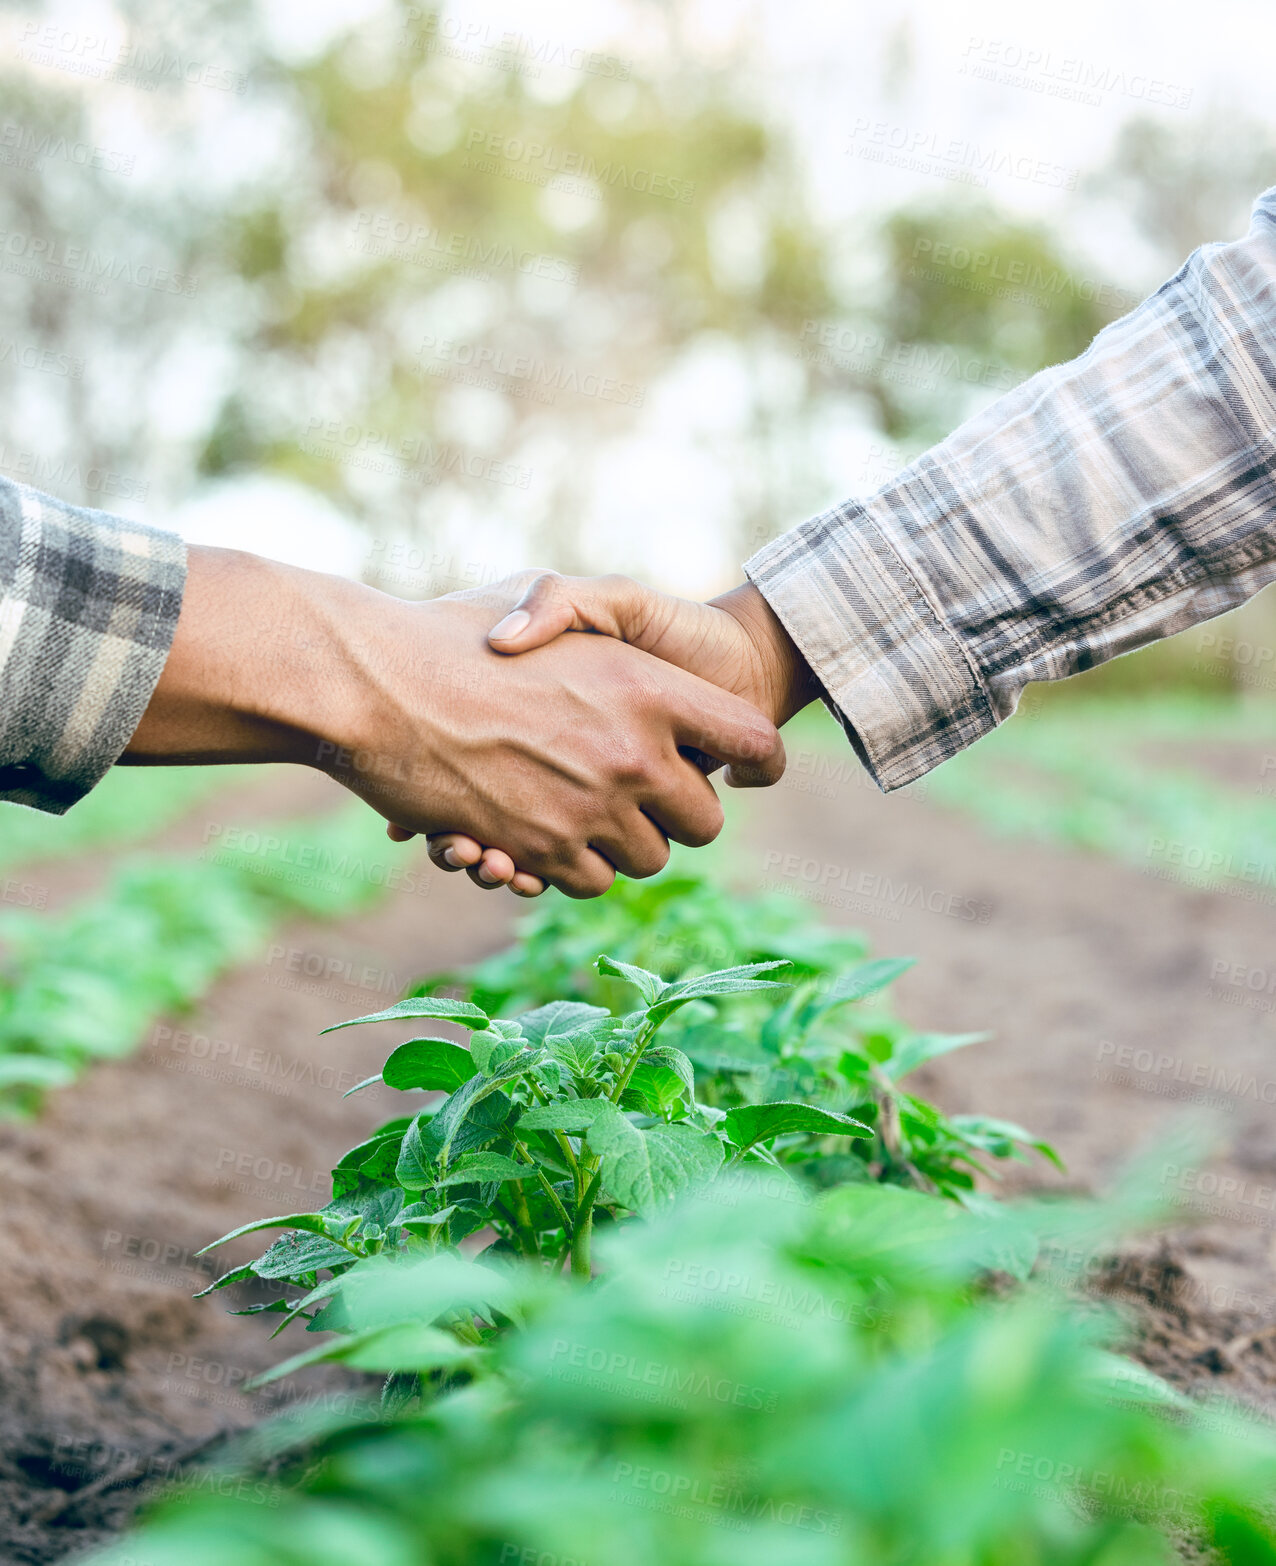 Buy stock photo Farming, agriculture and handshake for b2b business deal, partnership or agreement on agro farm shaking hands for trust, teamwork and growth. Man and woman farmer together for sustainability support